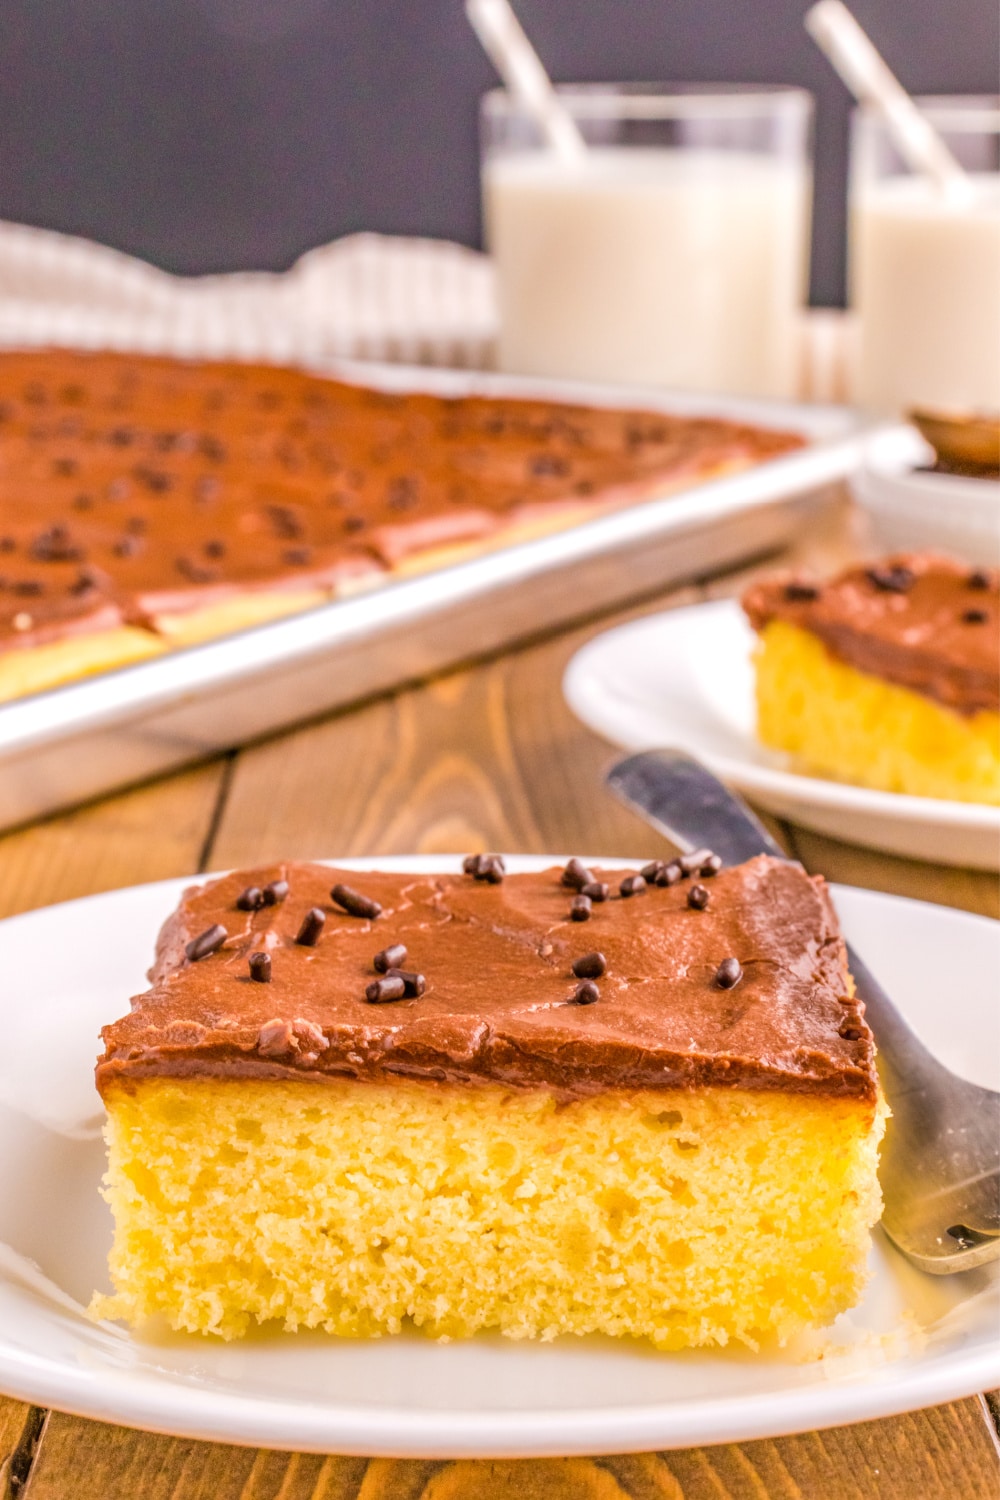 A slice of Yellow Sheet Cake with Chocolate Frosting on a white dessert plate sits in front of the remaining cake in the sheet pan.